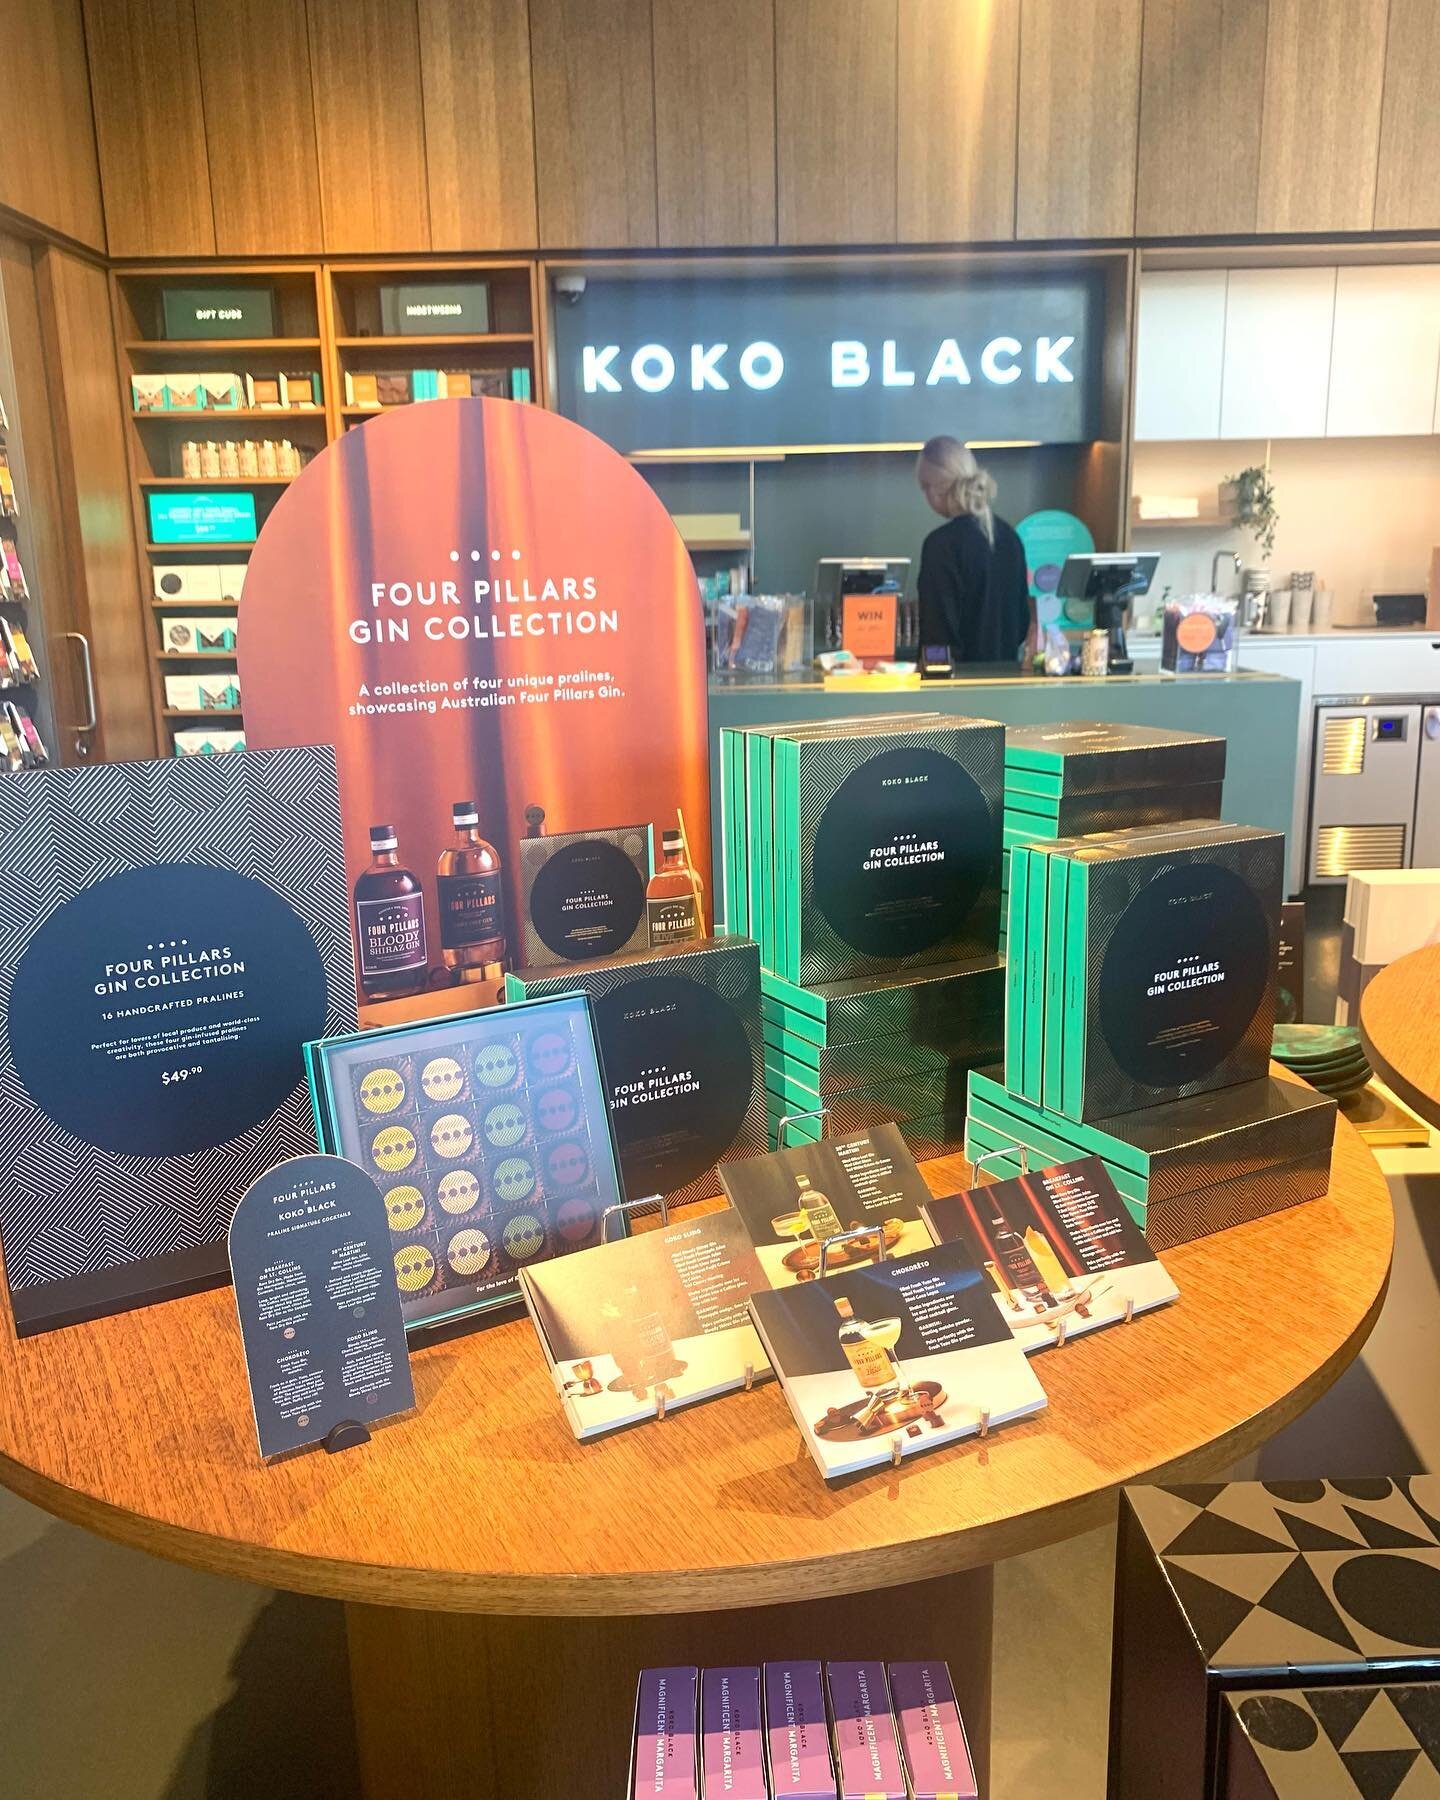 Simple pleasures, sensory overload walking into a @kokoblackchocolate store. I just happened to be driving by and suddenly remembered their post Easter 40% off all Easter stock. Yum! 🐣 

Marketing works 💯 with the right strategies. This morning I r